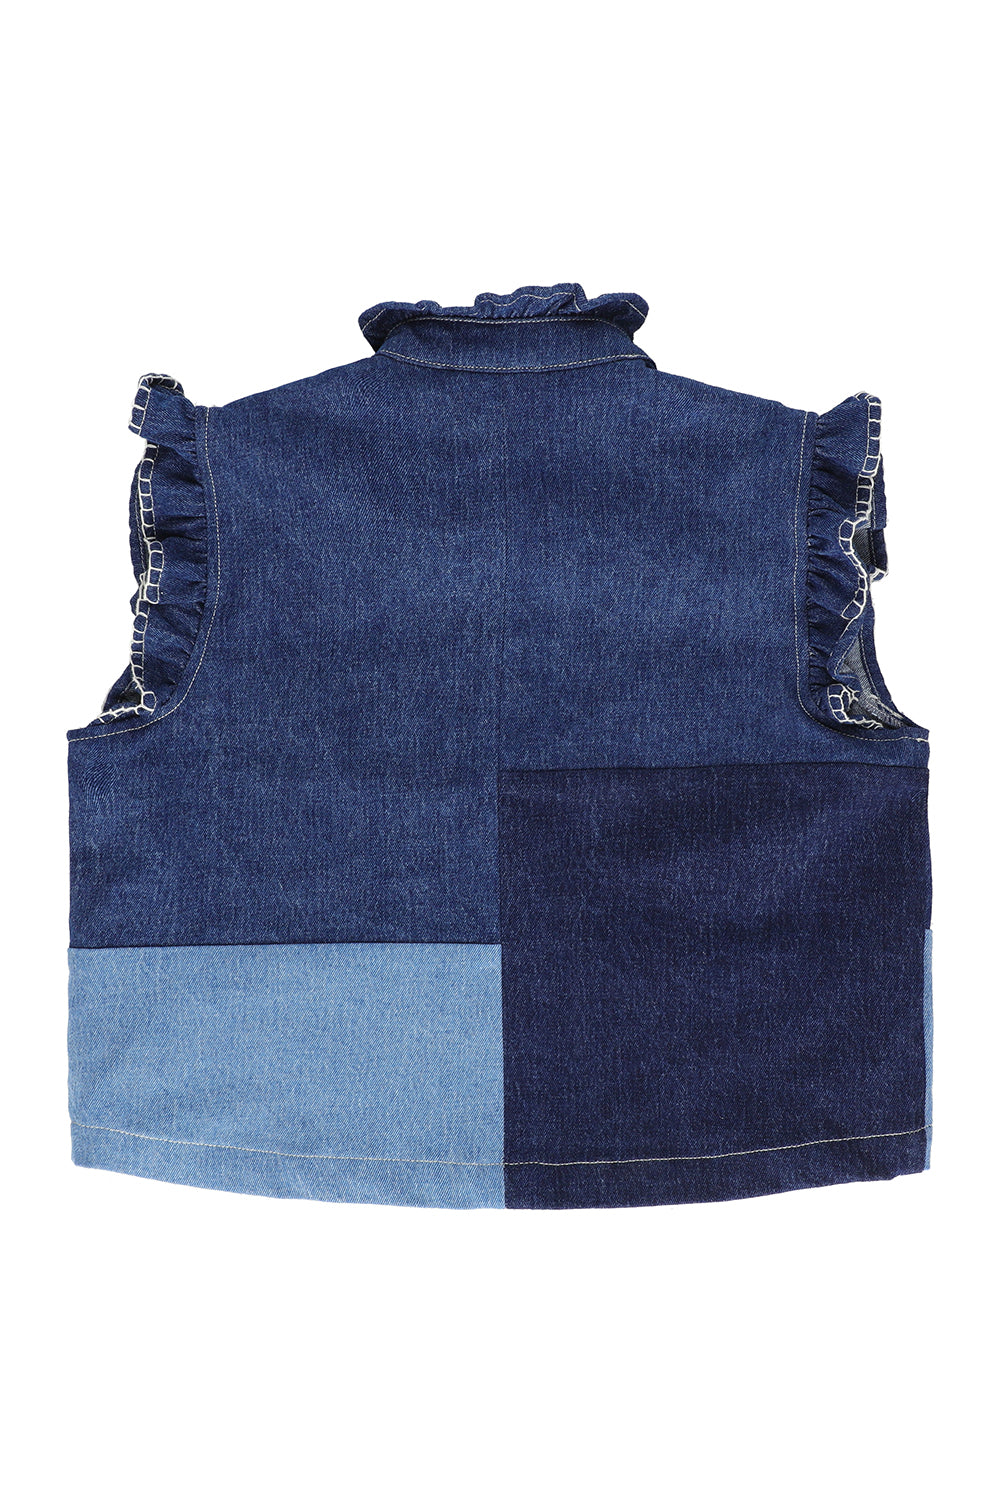 Pablo Waistcoat in Patched Denim